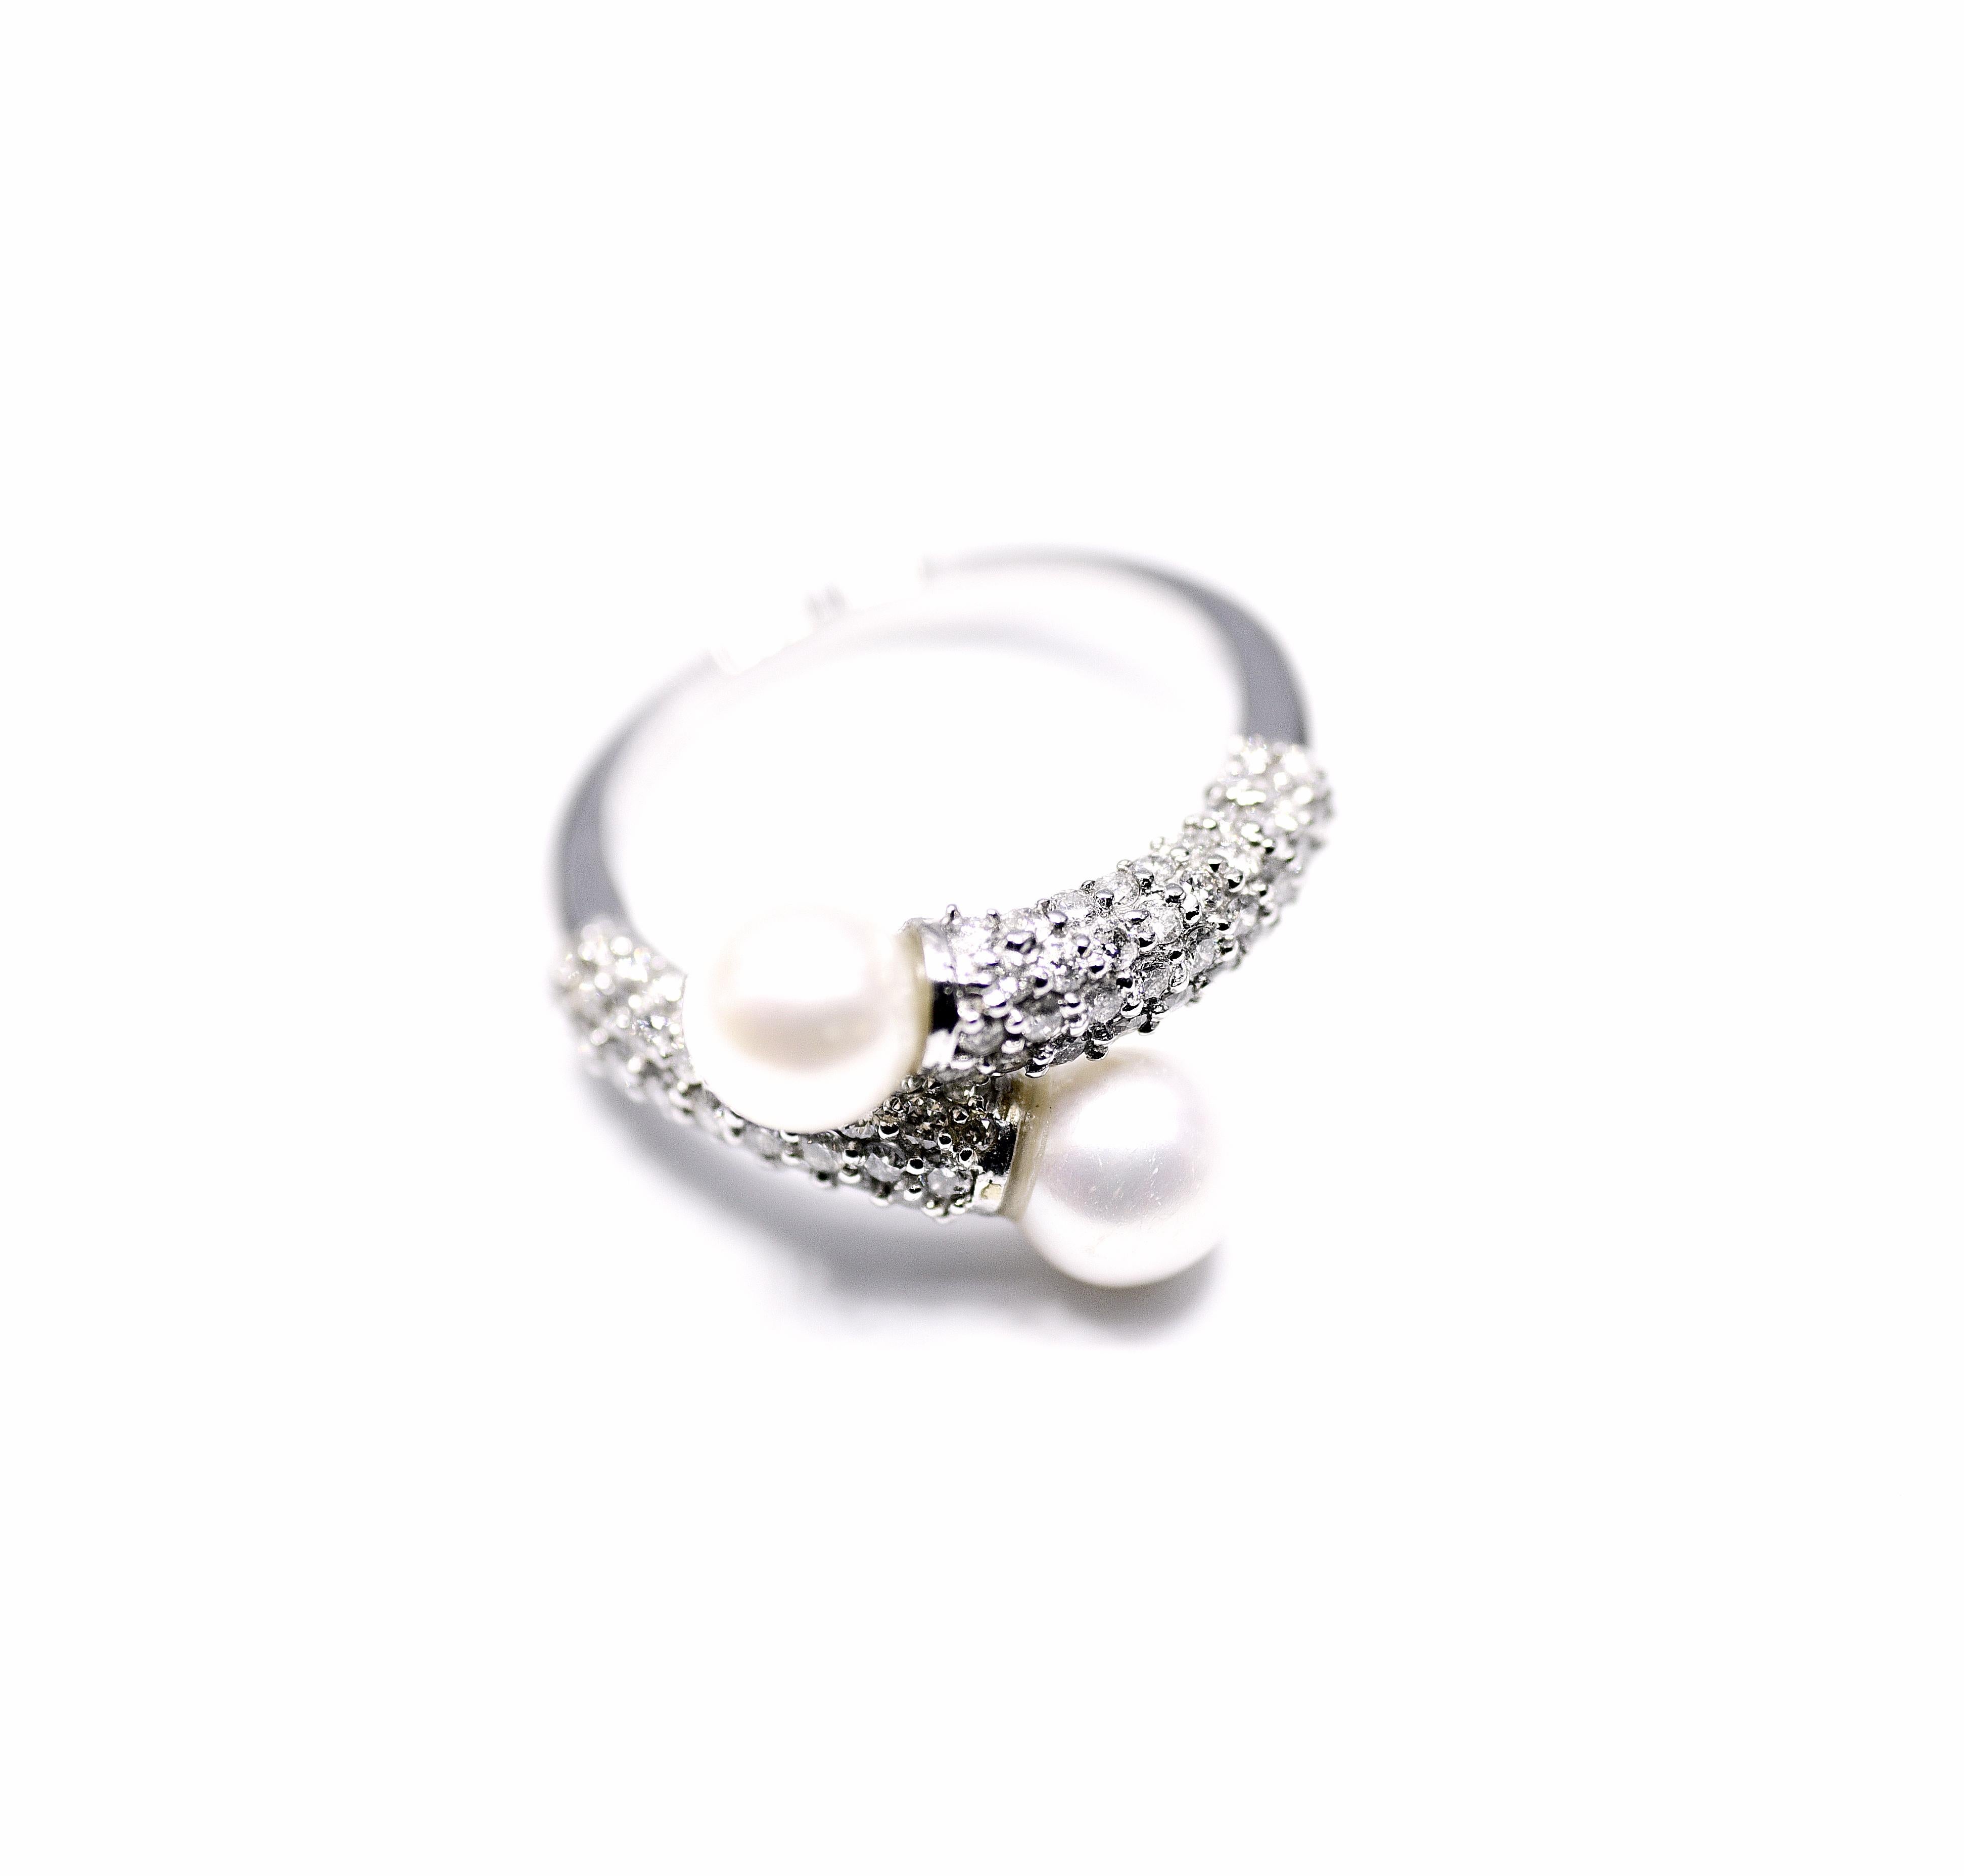 This effortlessly charming Diamond Pearl Unity Ring has dazzling 0.76 ct diamonds set in 18k white gold with 3.17 ct natural pearls will definitely be the best Anniversary ring. 
Most of our jewels are made to order, so please allow us for a 2-4